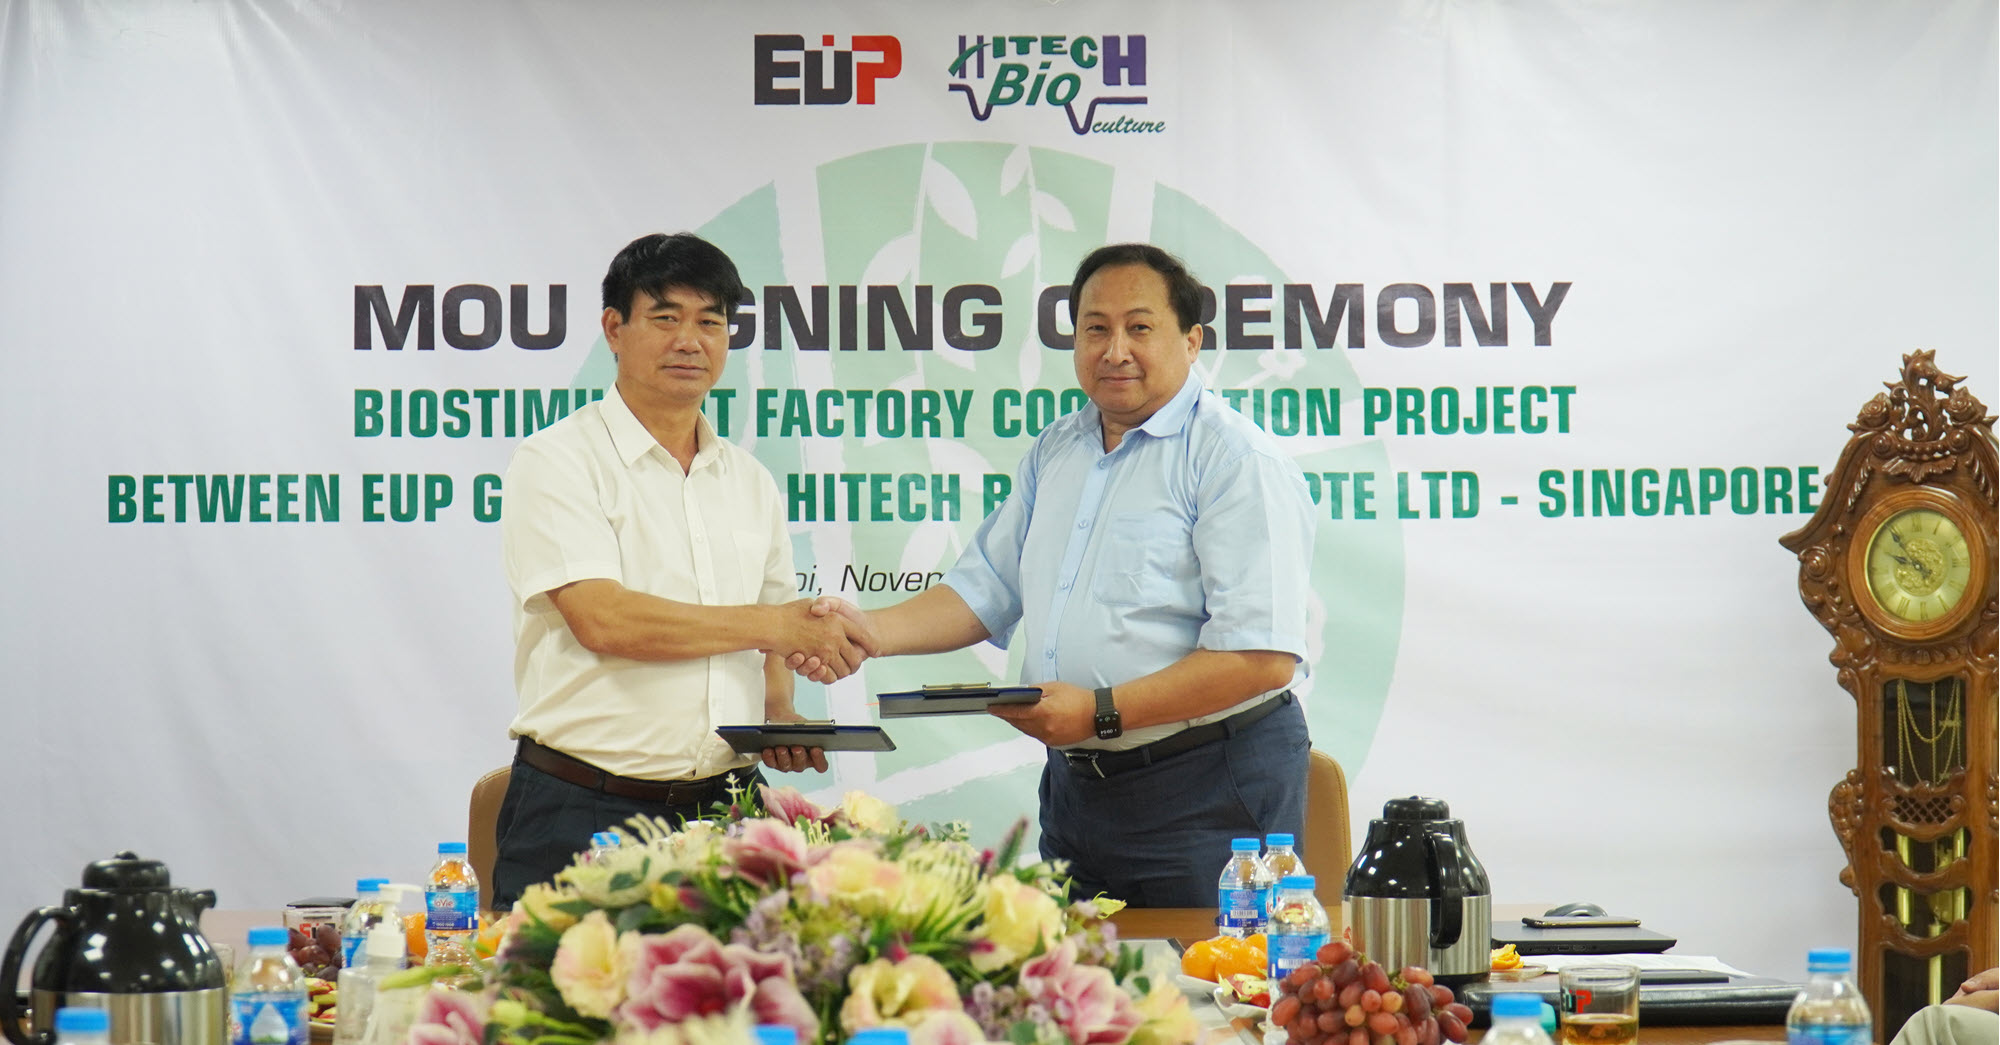 Mr. Hoang Quoc Huy and Drs. William shake hands